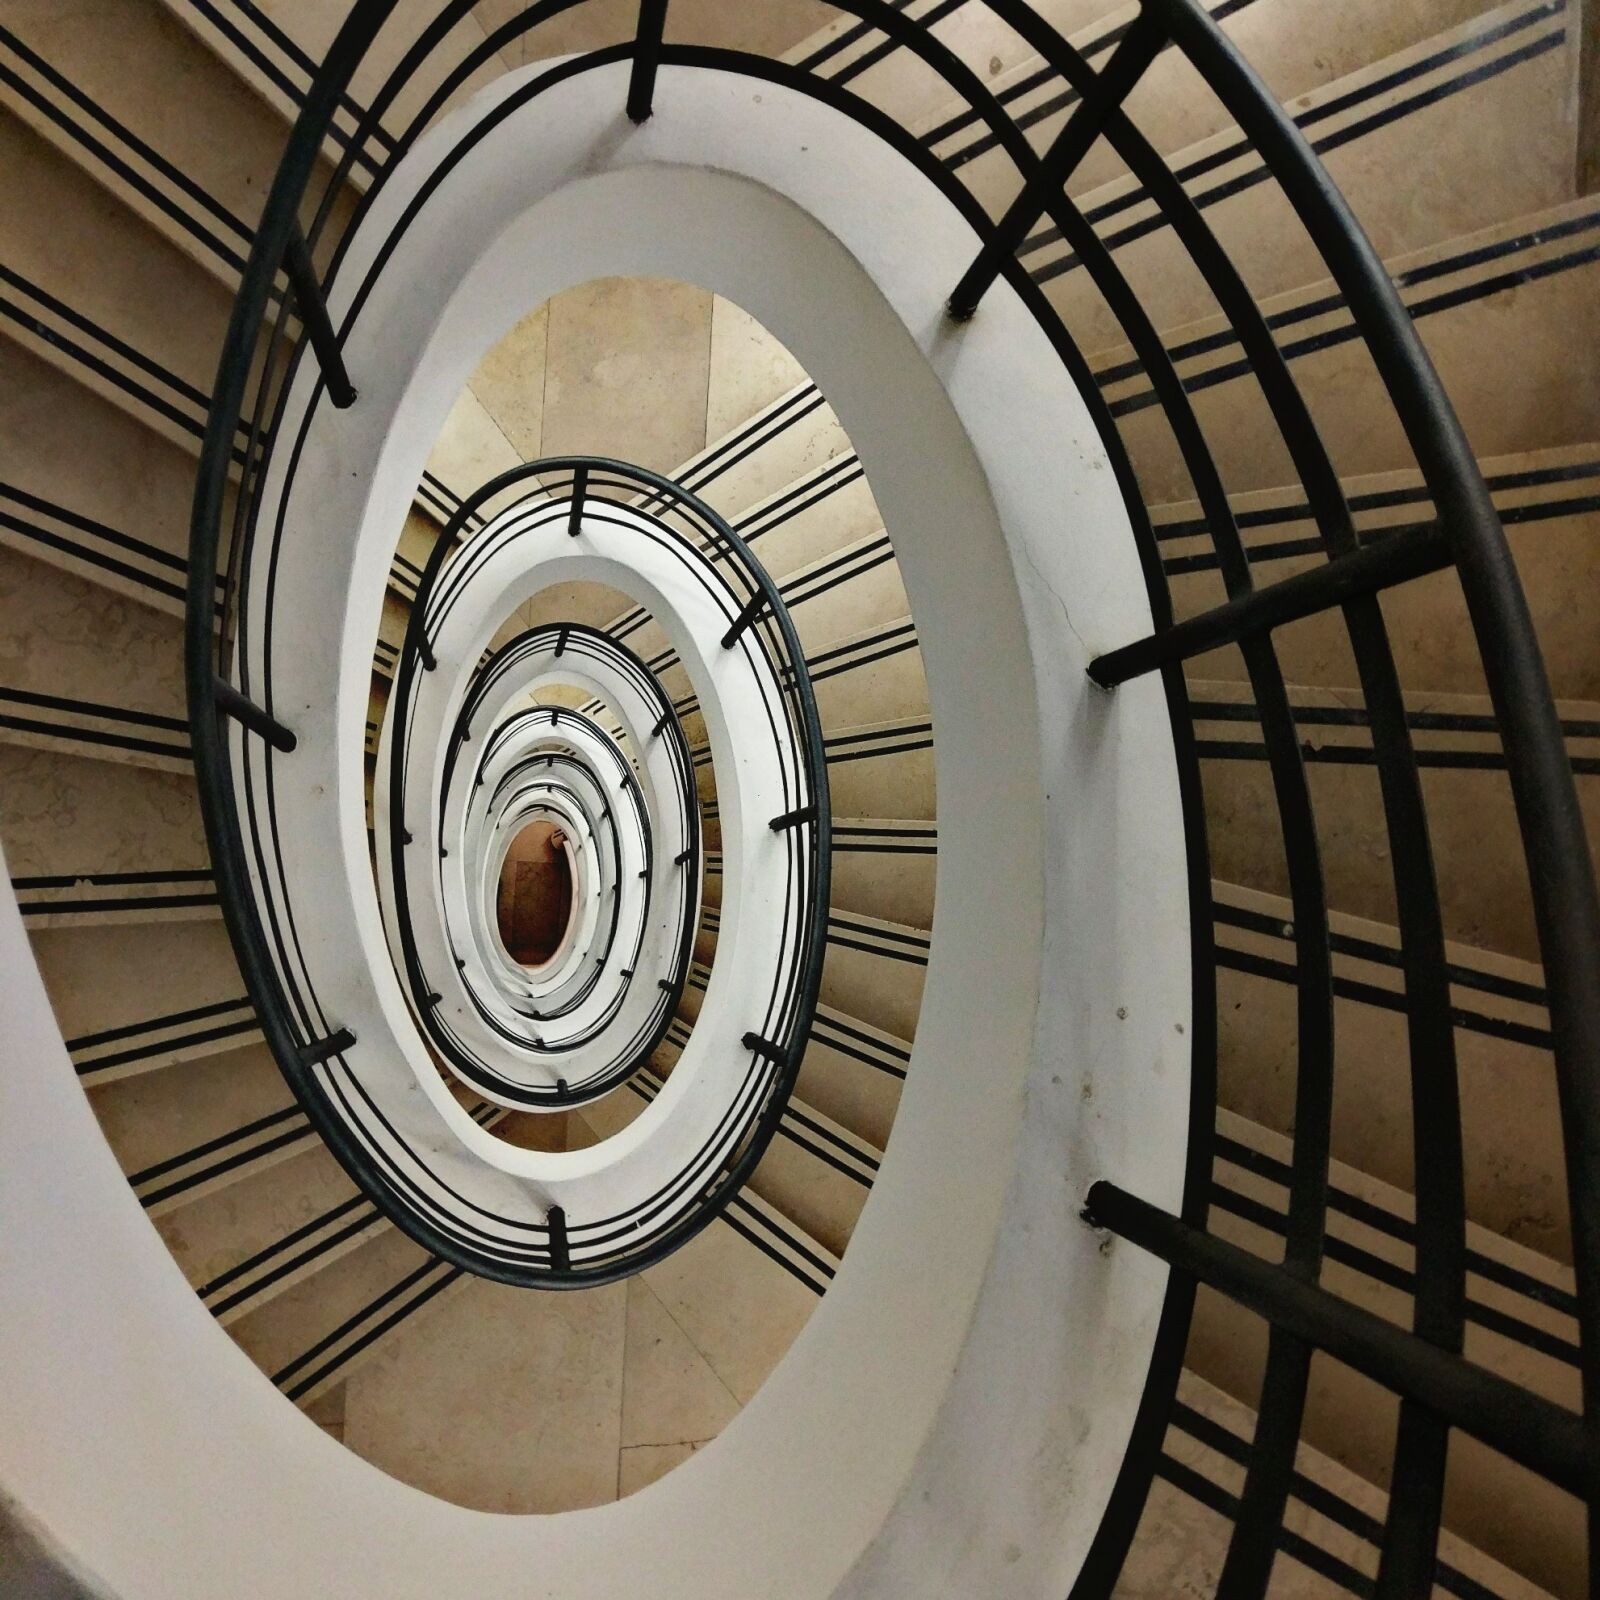 HTC 10 sample photo. Stairs, descent, hypnosis photography